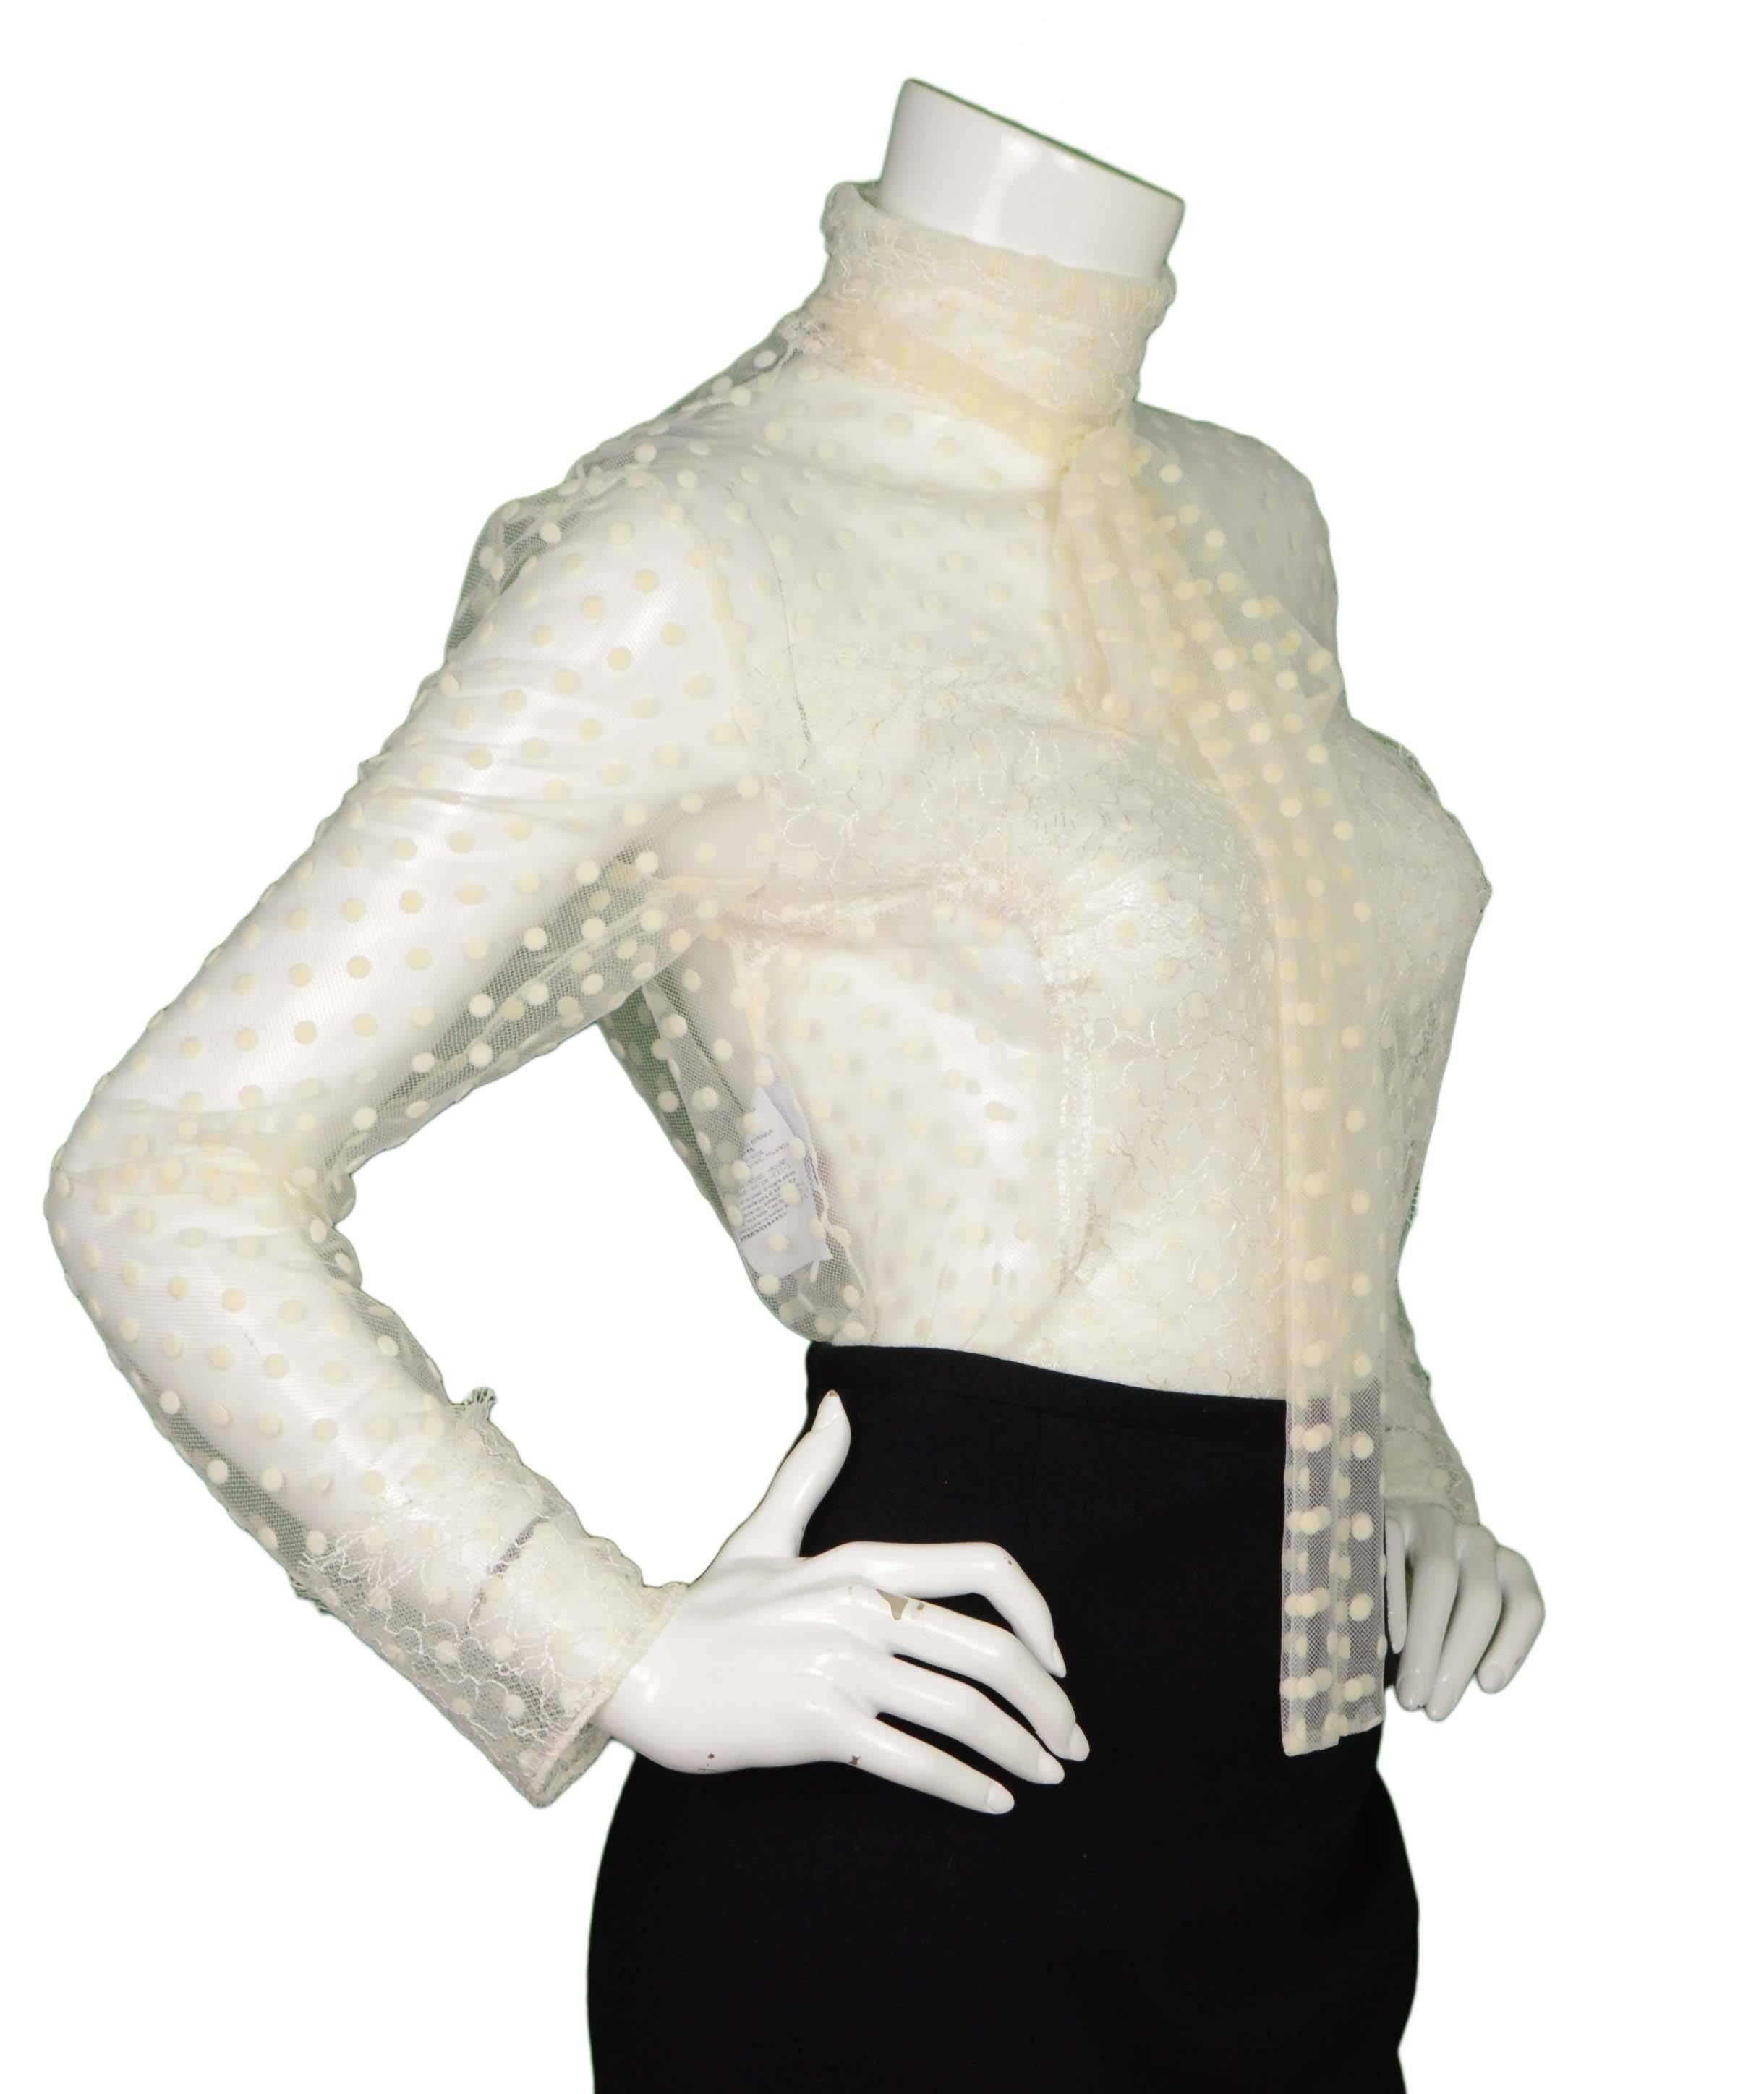 Rochas White Swiss Dot Lace Long Sleeve Blouse
Features neck tie
Made In: Italy
Color: Ivory
Composition: 66% polyamide, 34% viscose
Lining: None
Closure/Opening: Back zipper
Exterior Pockets: None
Interior Pockets: None
Retail Price: